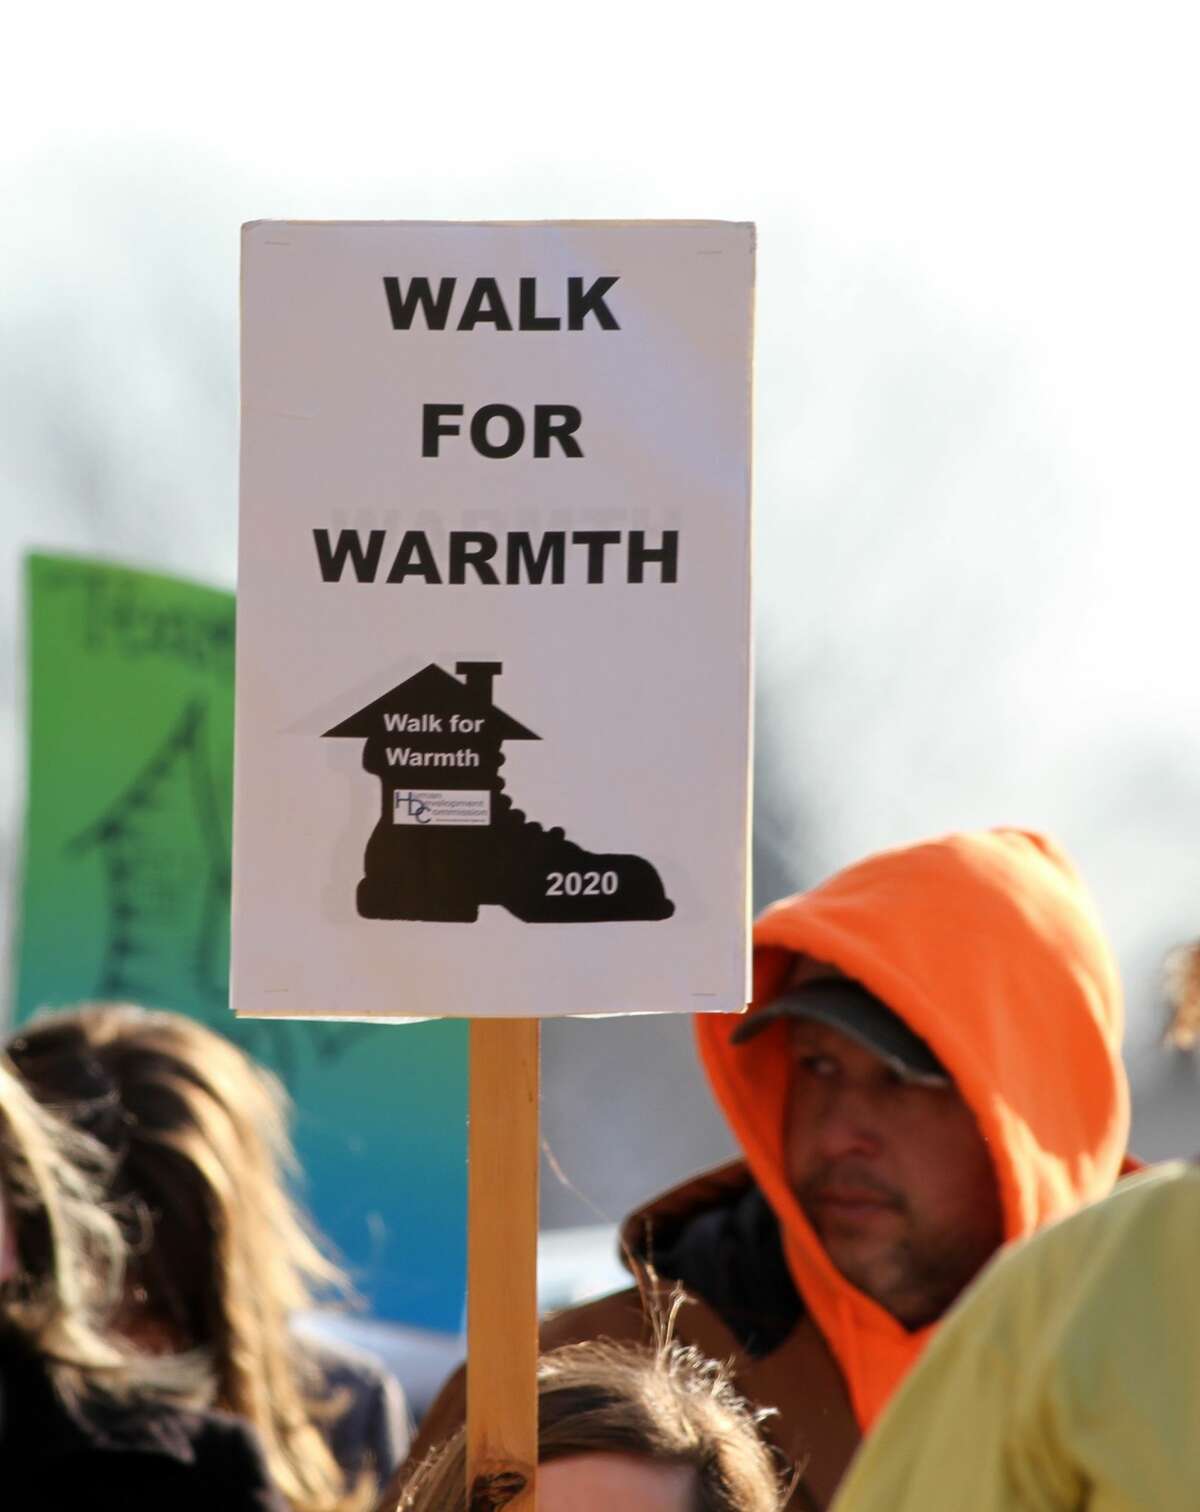 The 29th annual Walk for Warmth took place on Saturday, Feb. 22 as the Human Development Commission sought to increase awareness regarding utility emergencies, an especially important issue during the Winter months.